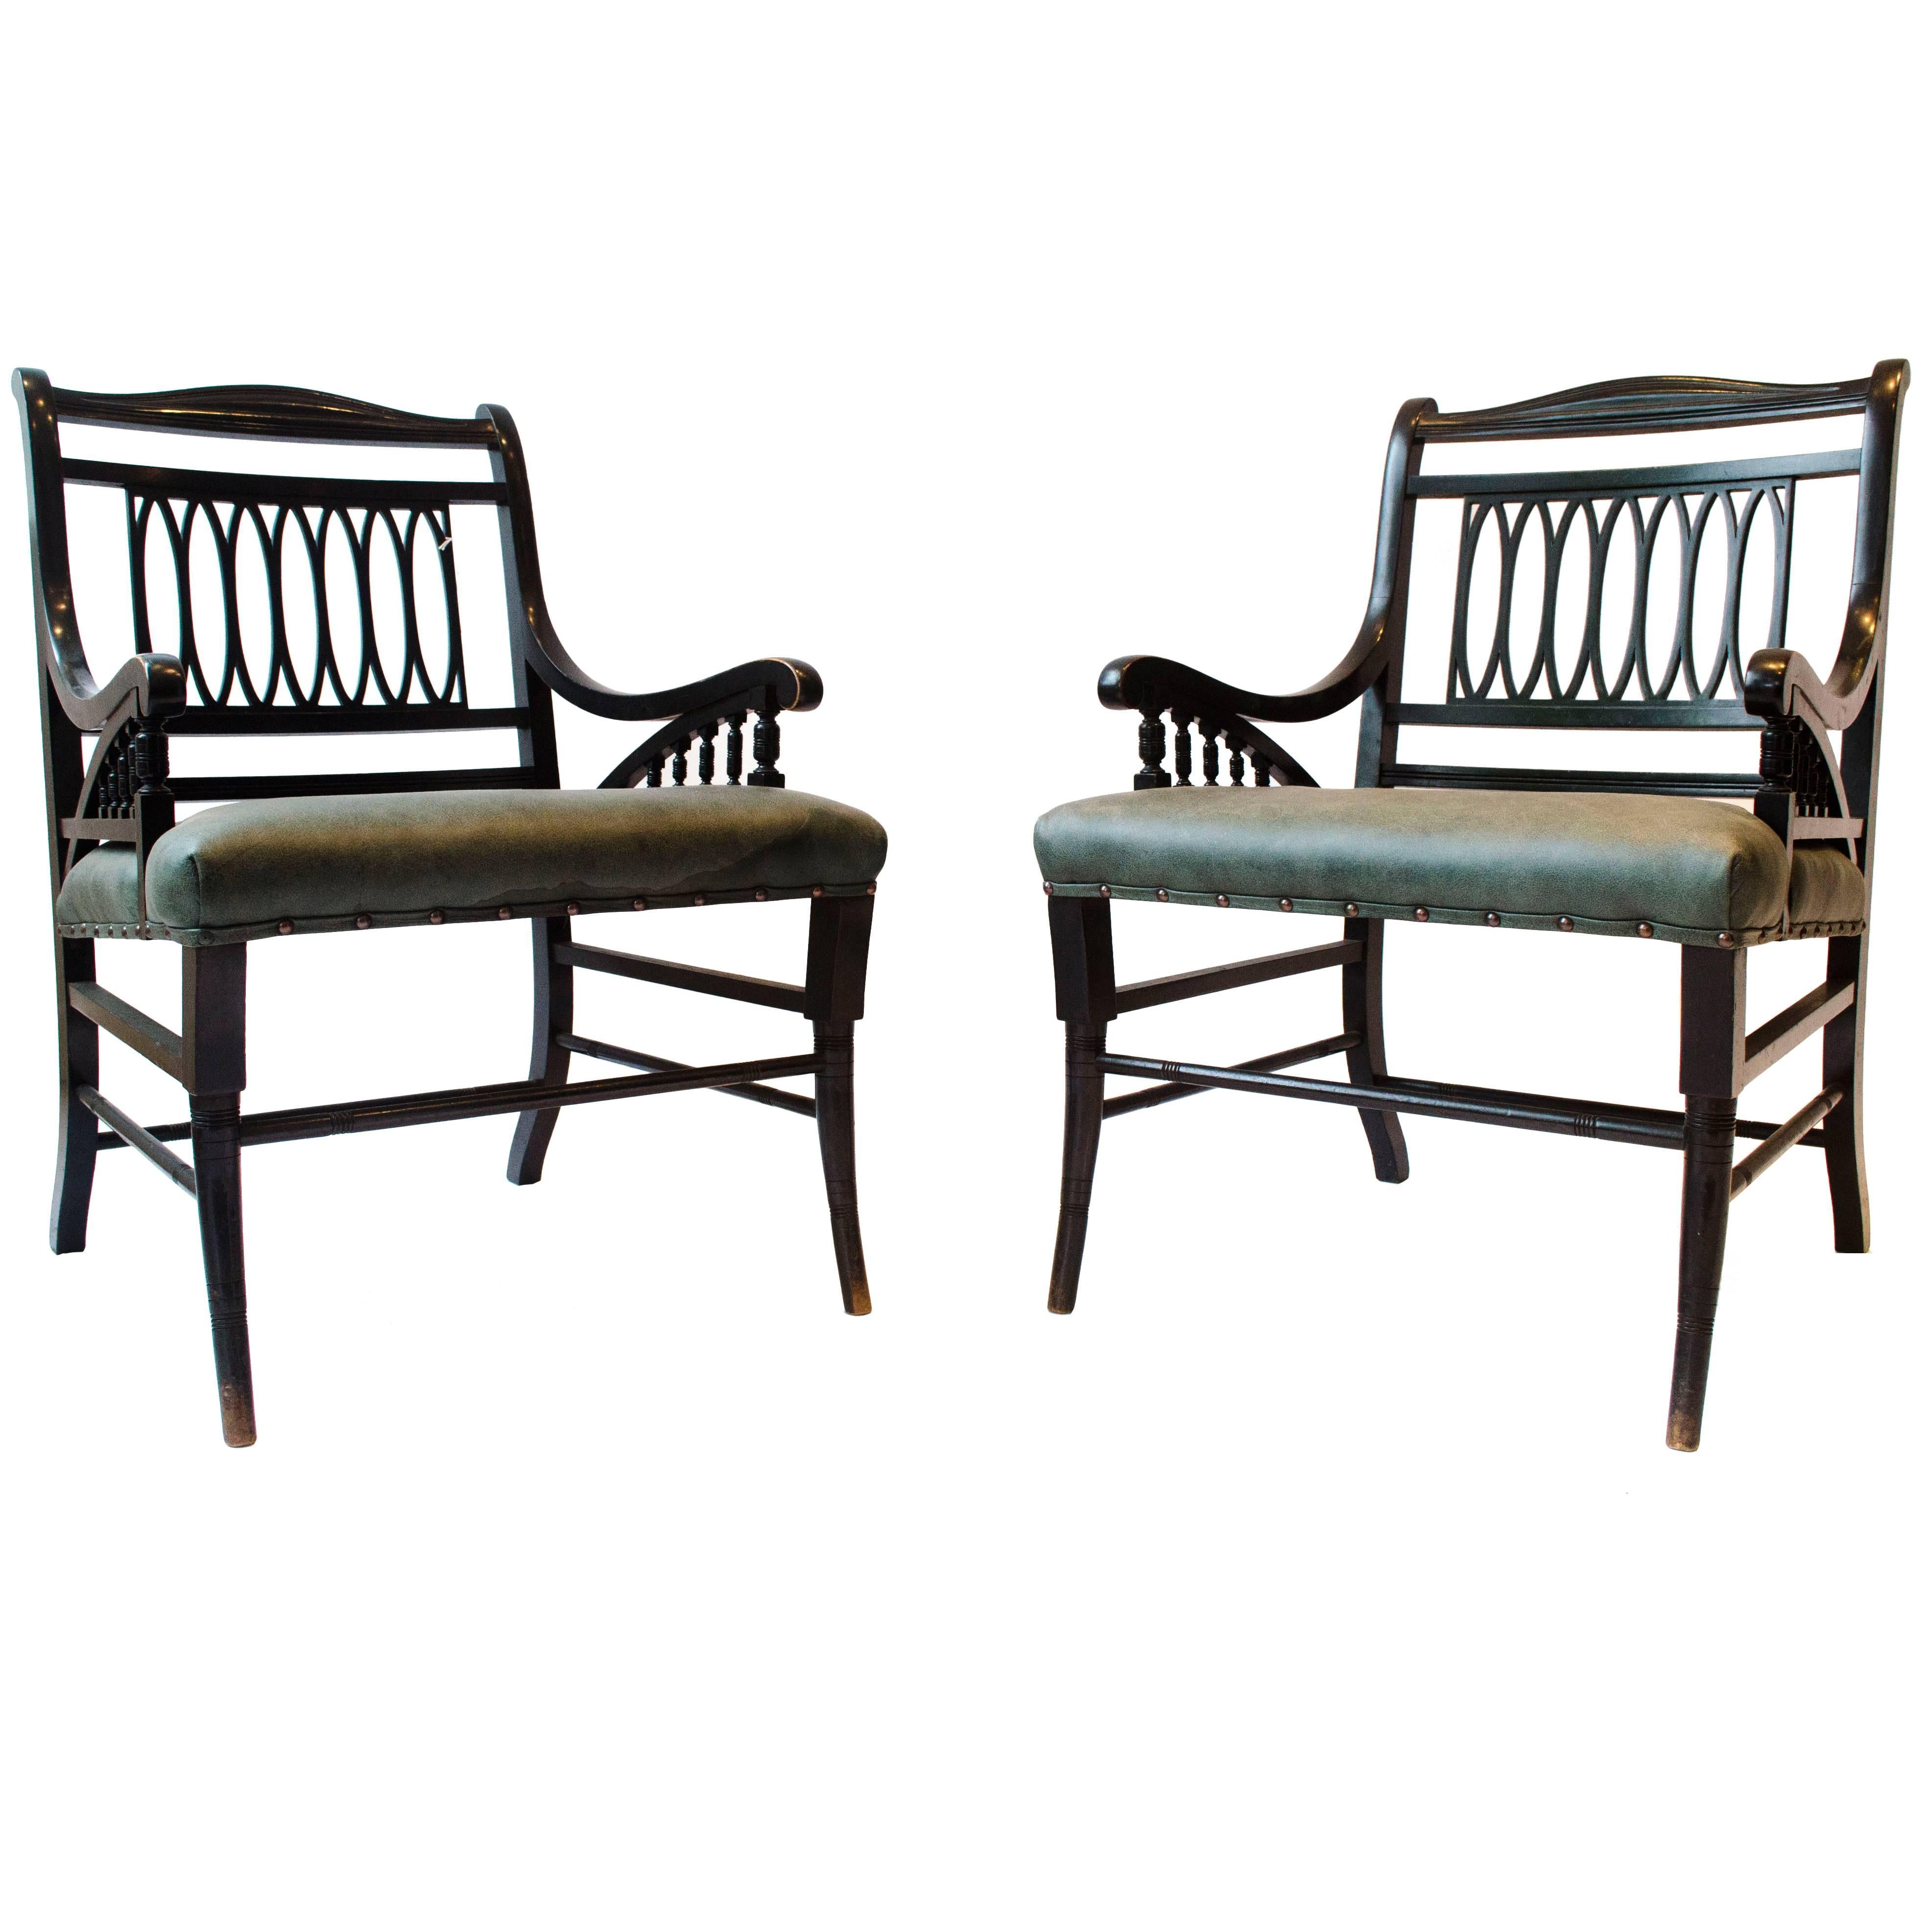 Pair of Anglo-Japanese Ebonized Open Armchairs. Attributed to Jas Shoolbred